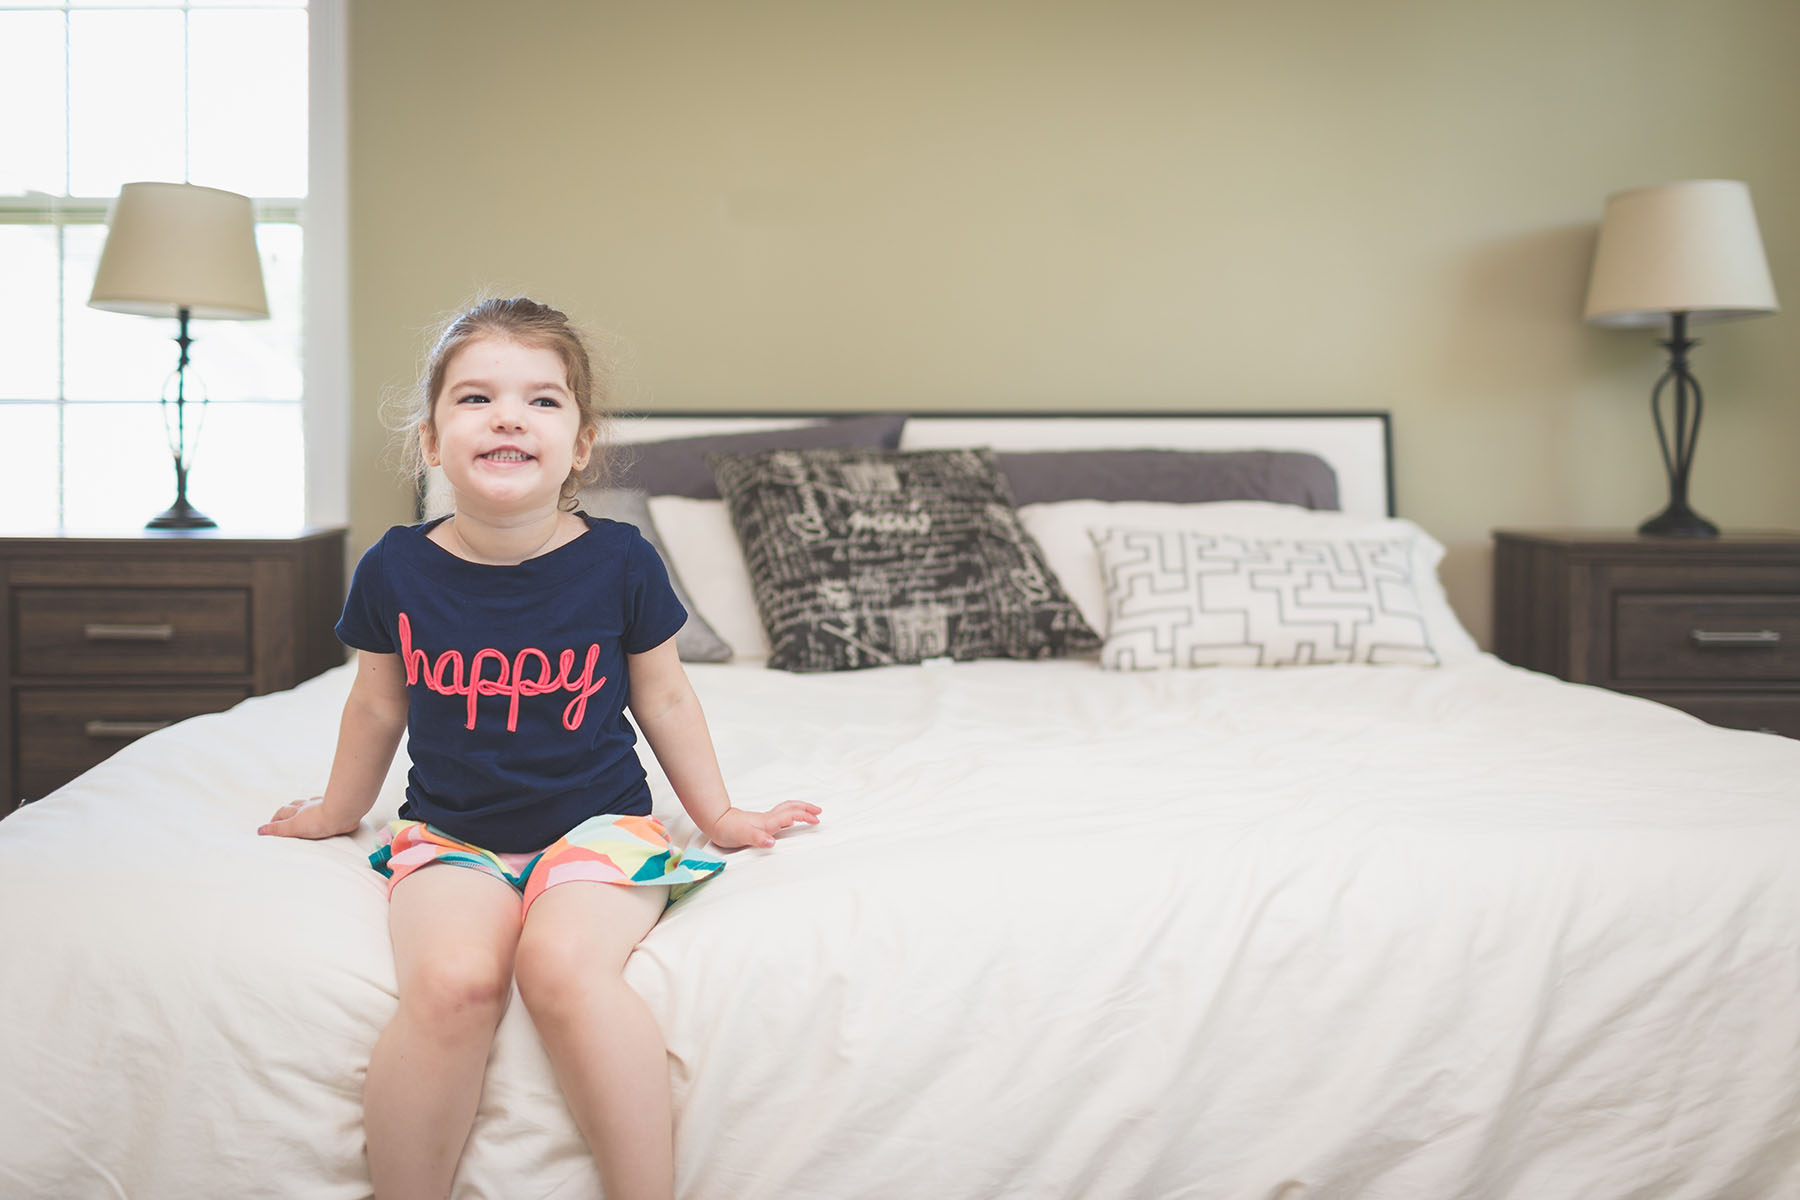 Happy young girls sits calmly smiling at the end of beautiful, modern bed.